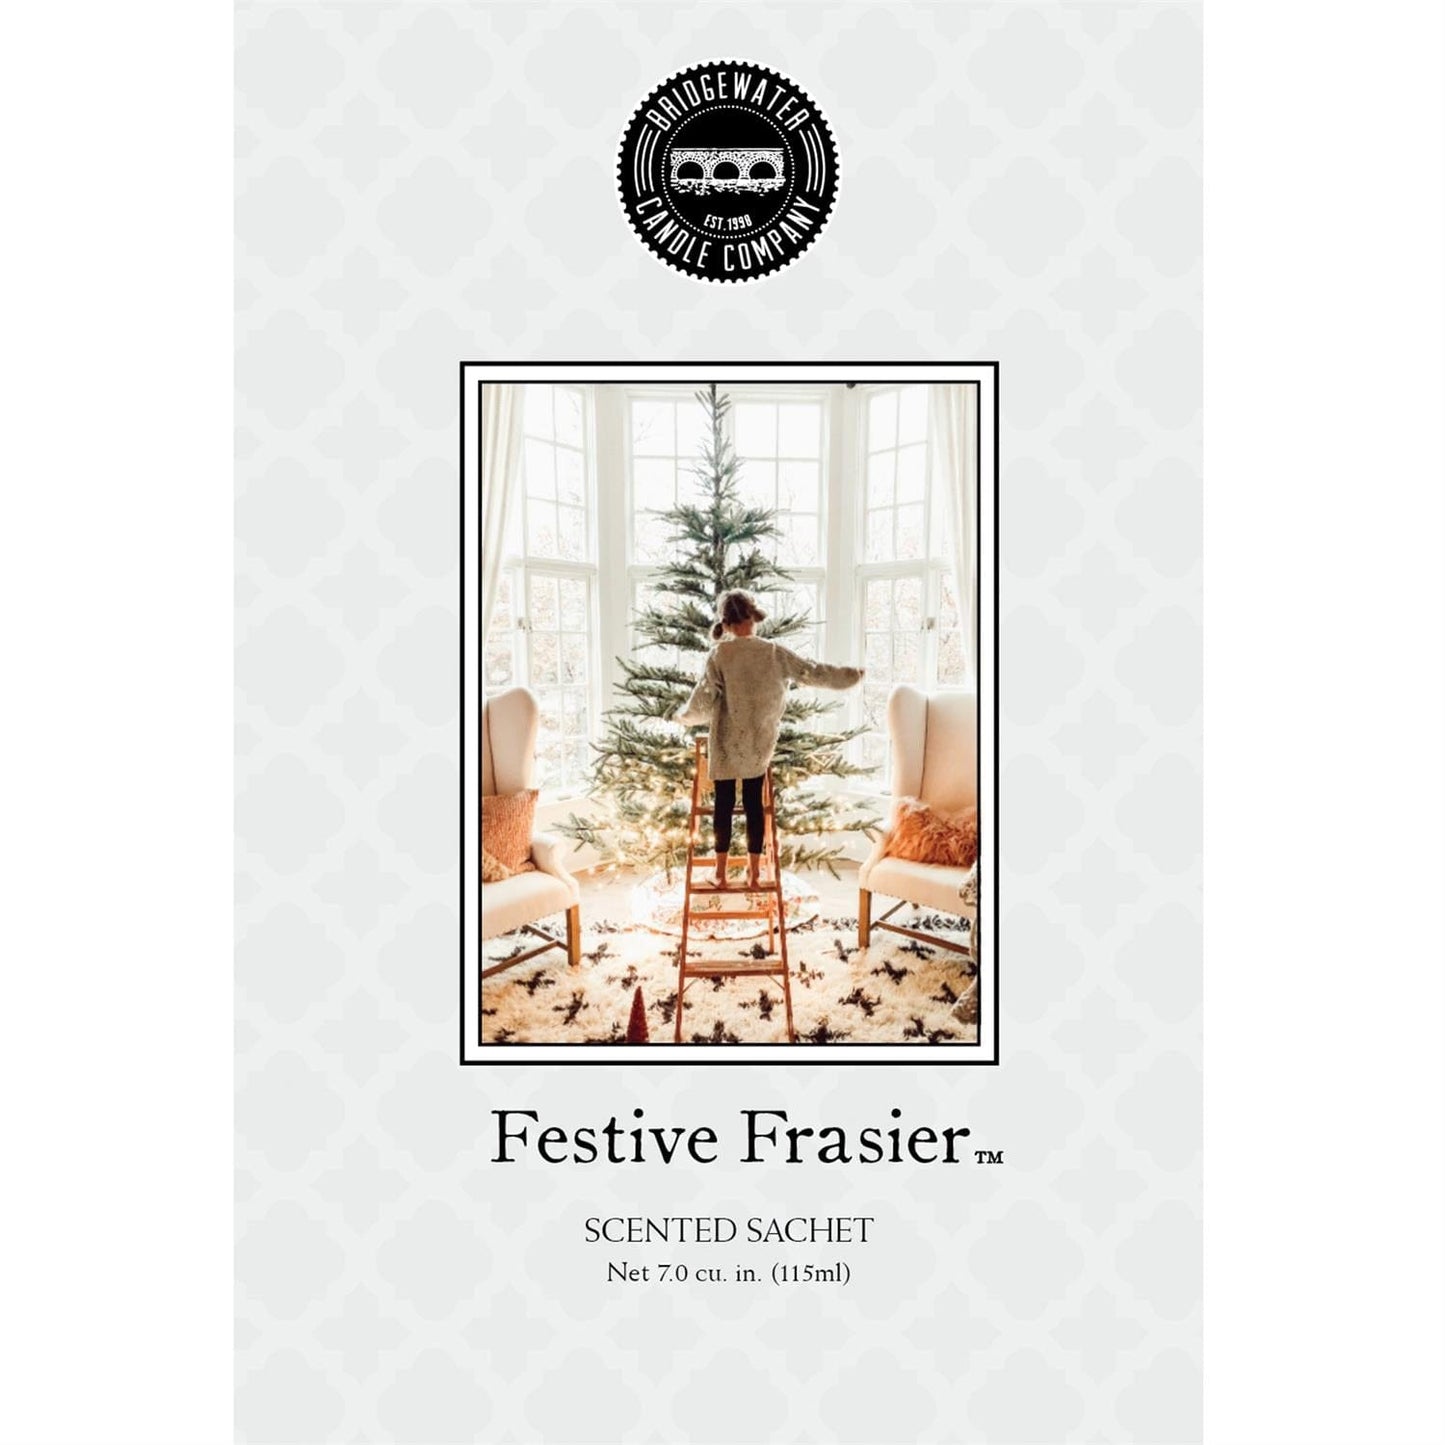 Sachets & Diffusers Festive Frasier - Scented Sachets - Bridgewater Candle Company BWC-106172